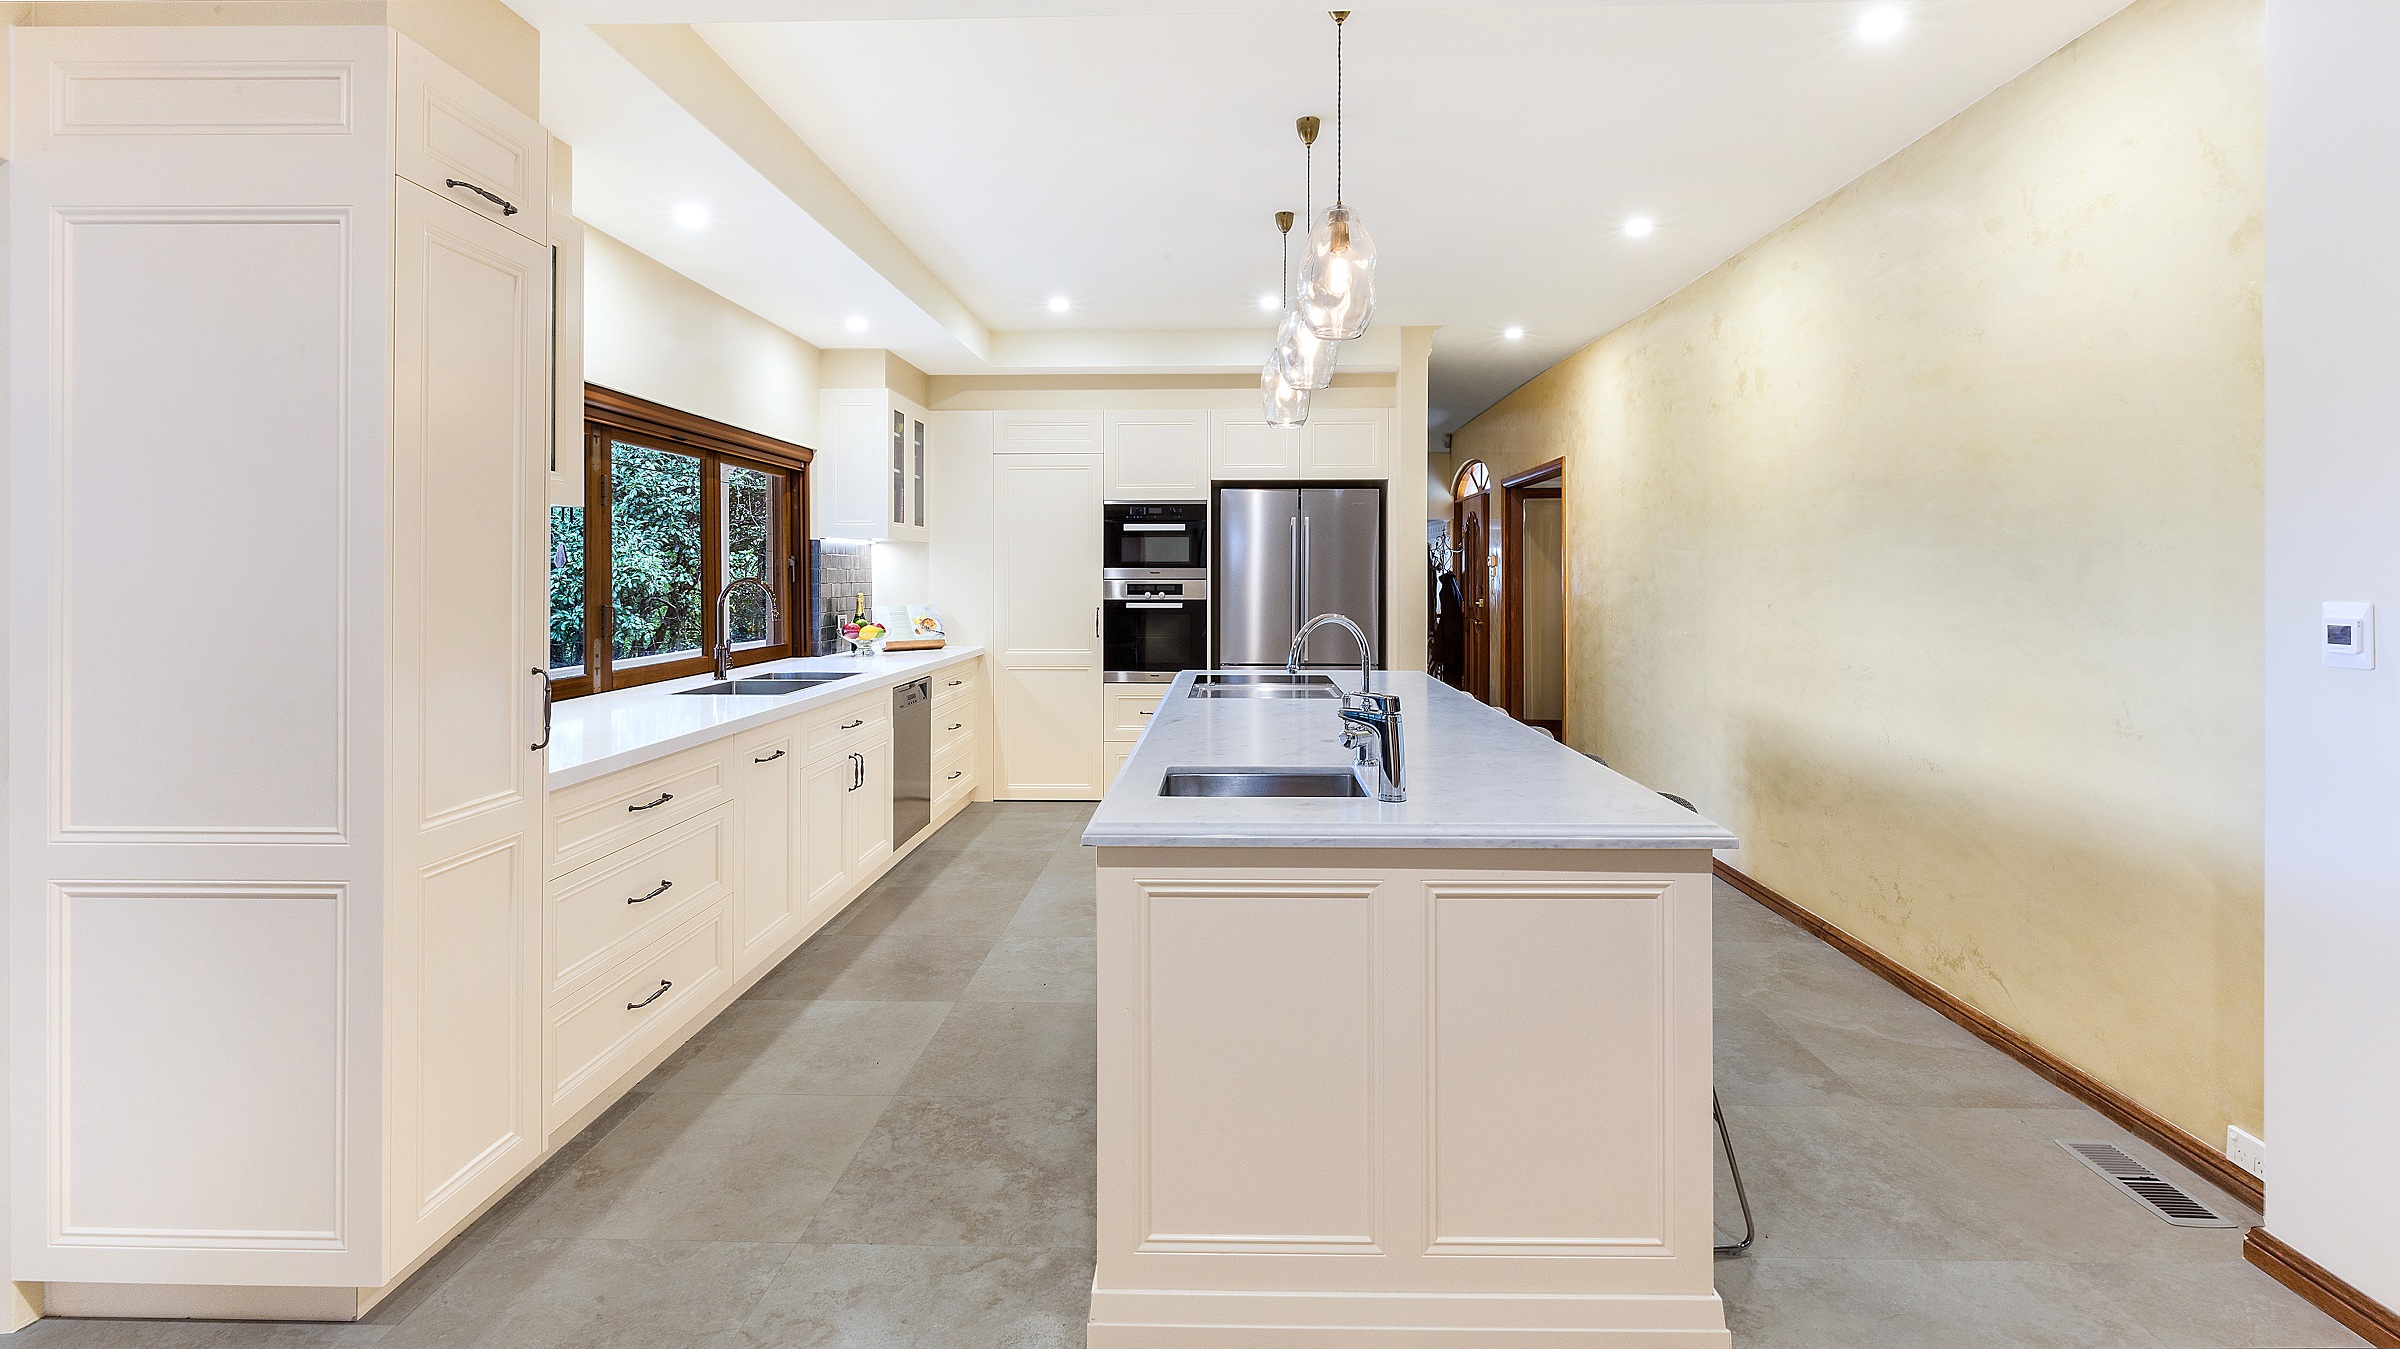 AFTER Epping Renovation - Provincial Style kitchen in a Satin Polyurethane finish with a Carrara Marble benchtop